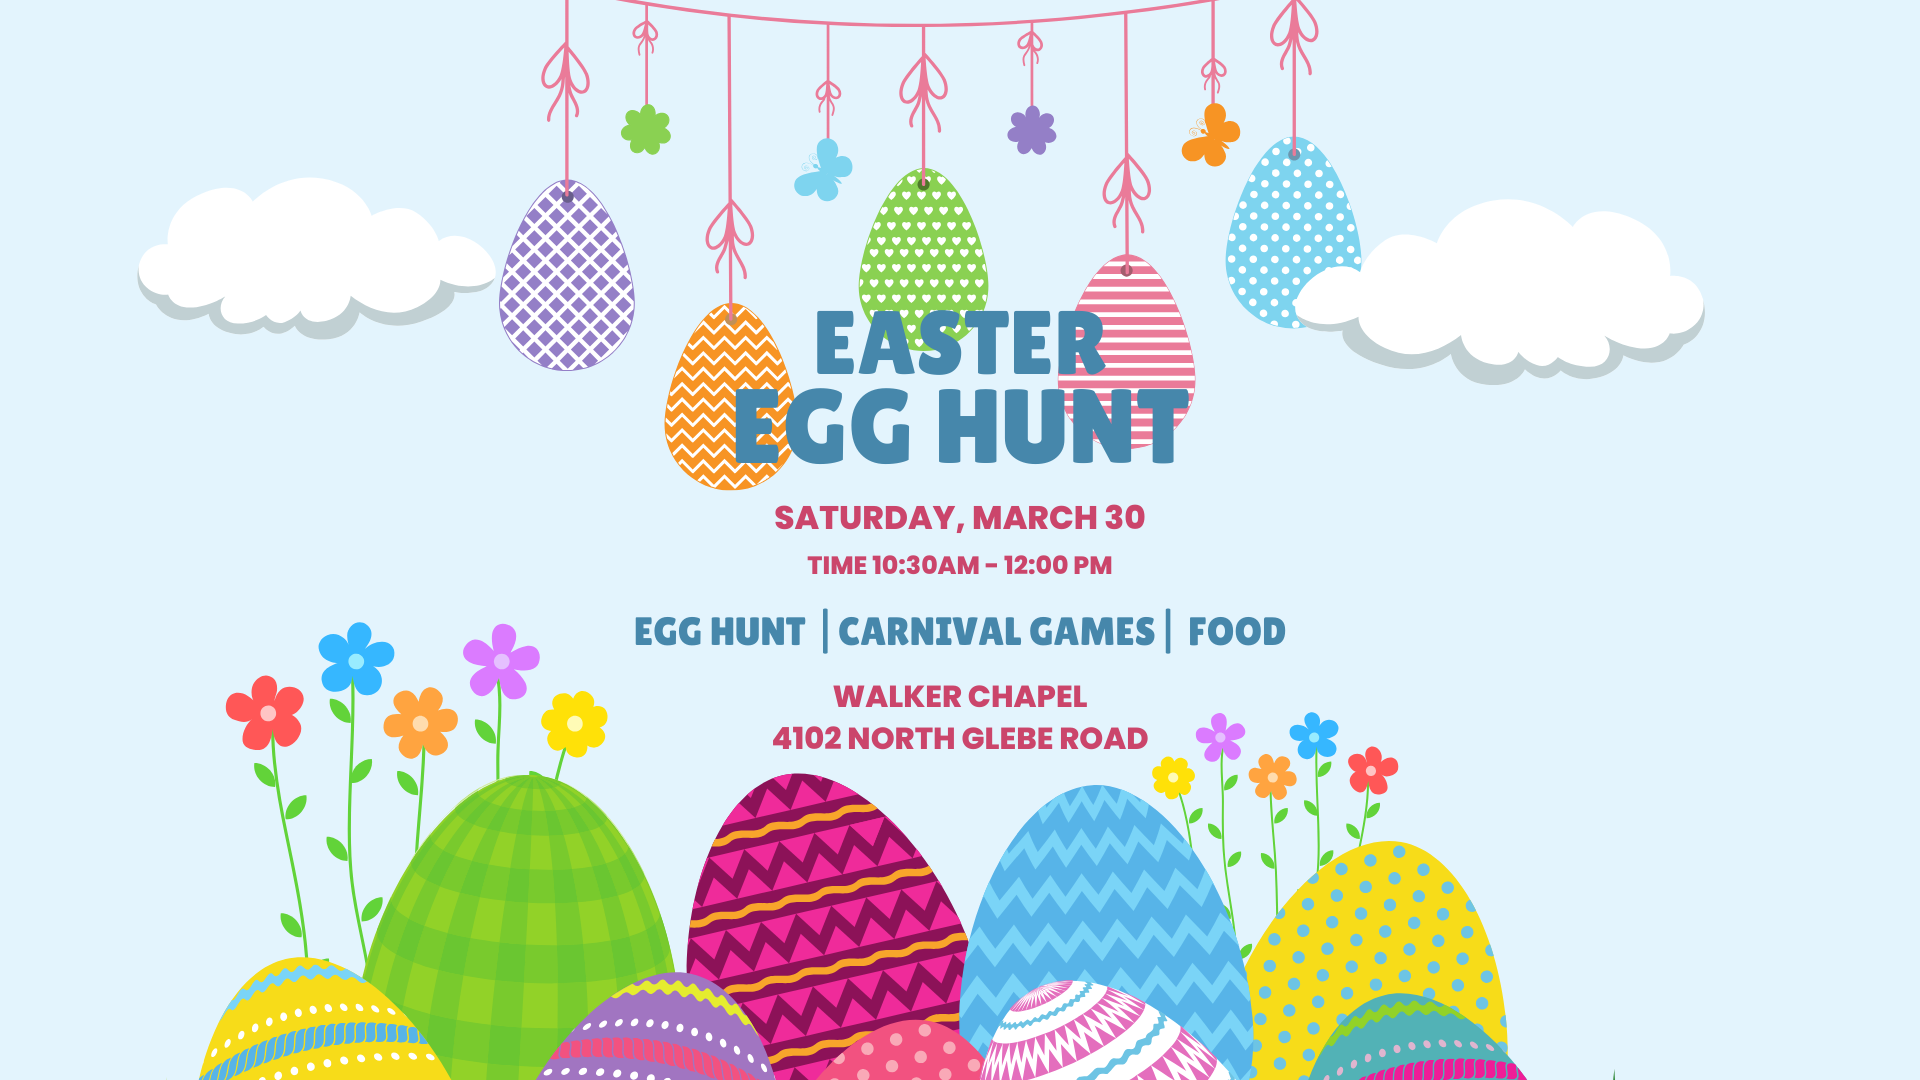 Get ready for an EGG-citing adventure!